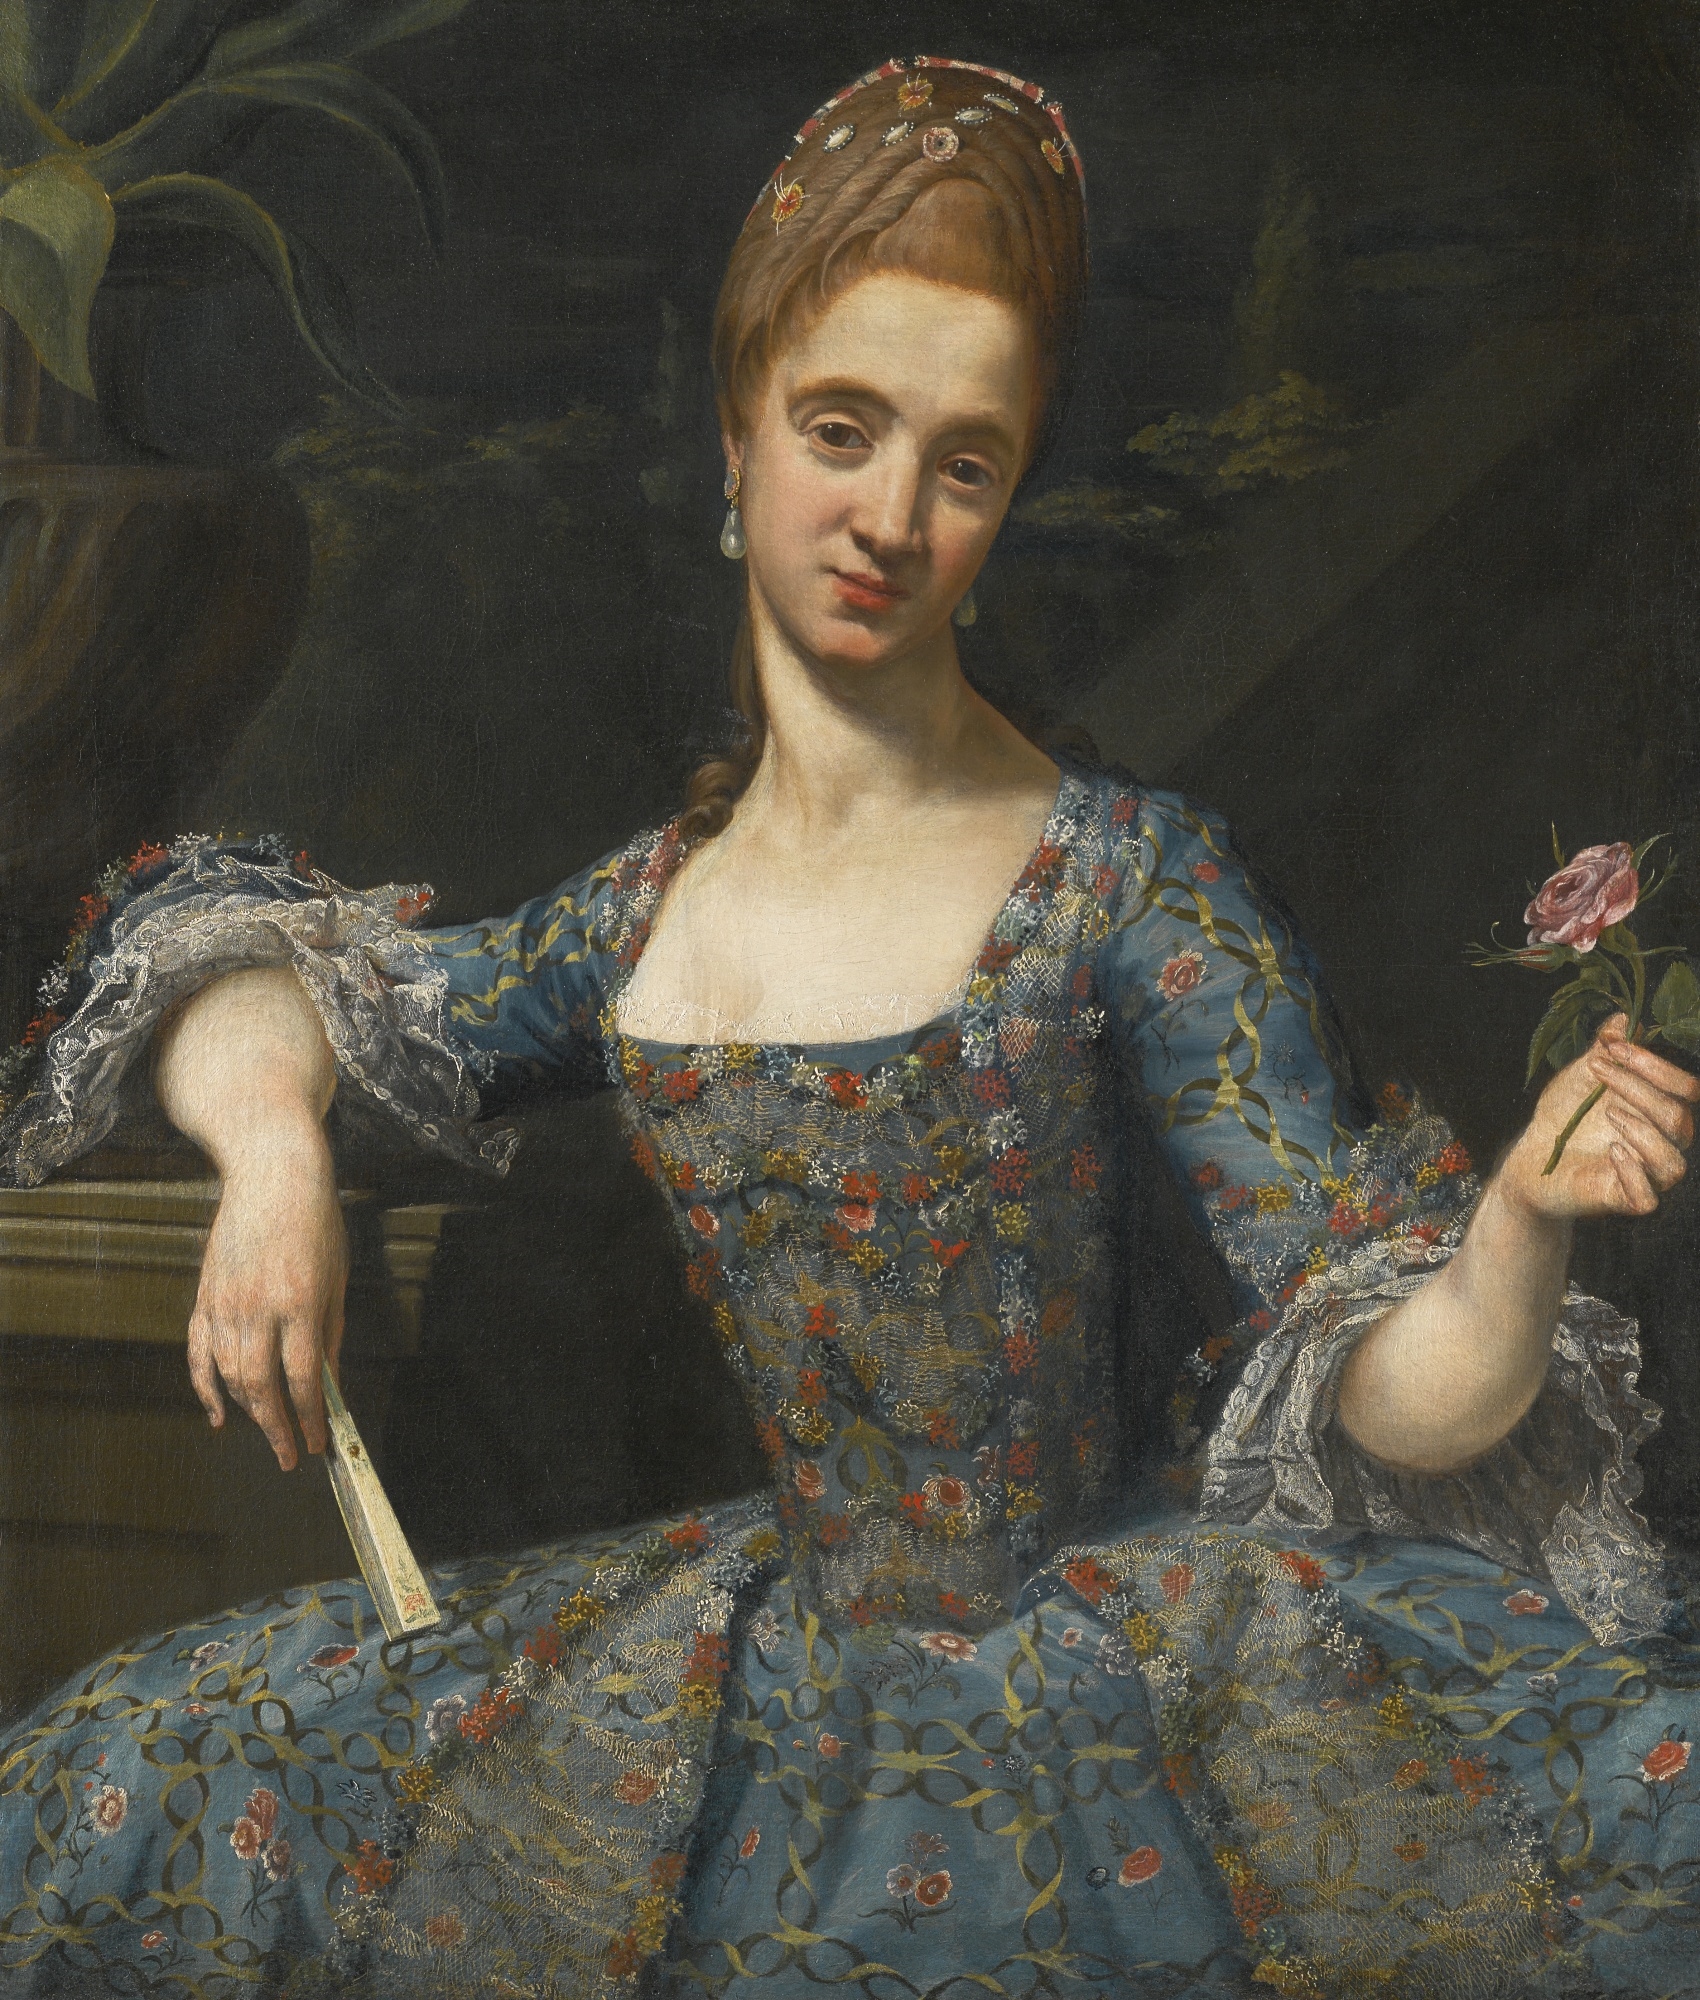 PORTRAIT OF A LADY IN AN ELABORATELY EMBROIDERED BLUE DRESS by Giuseppe Baldrighi